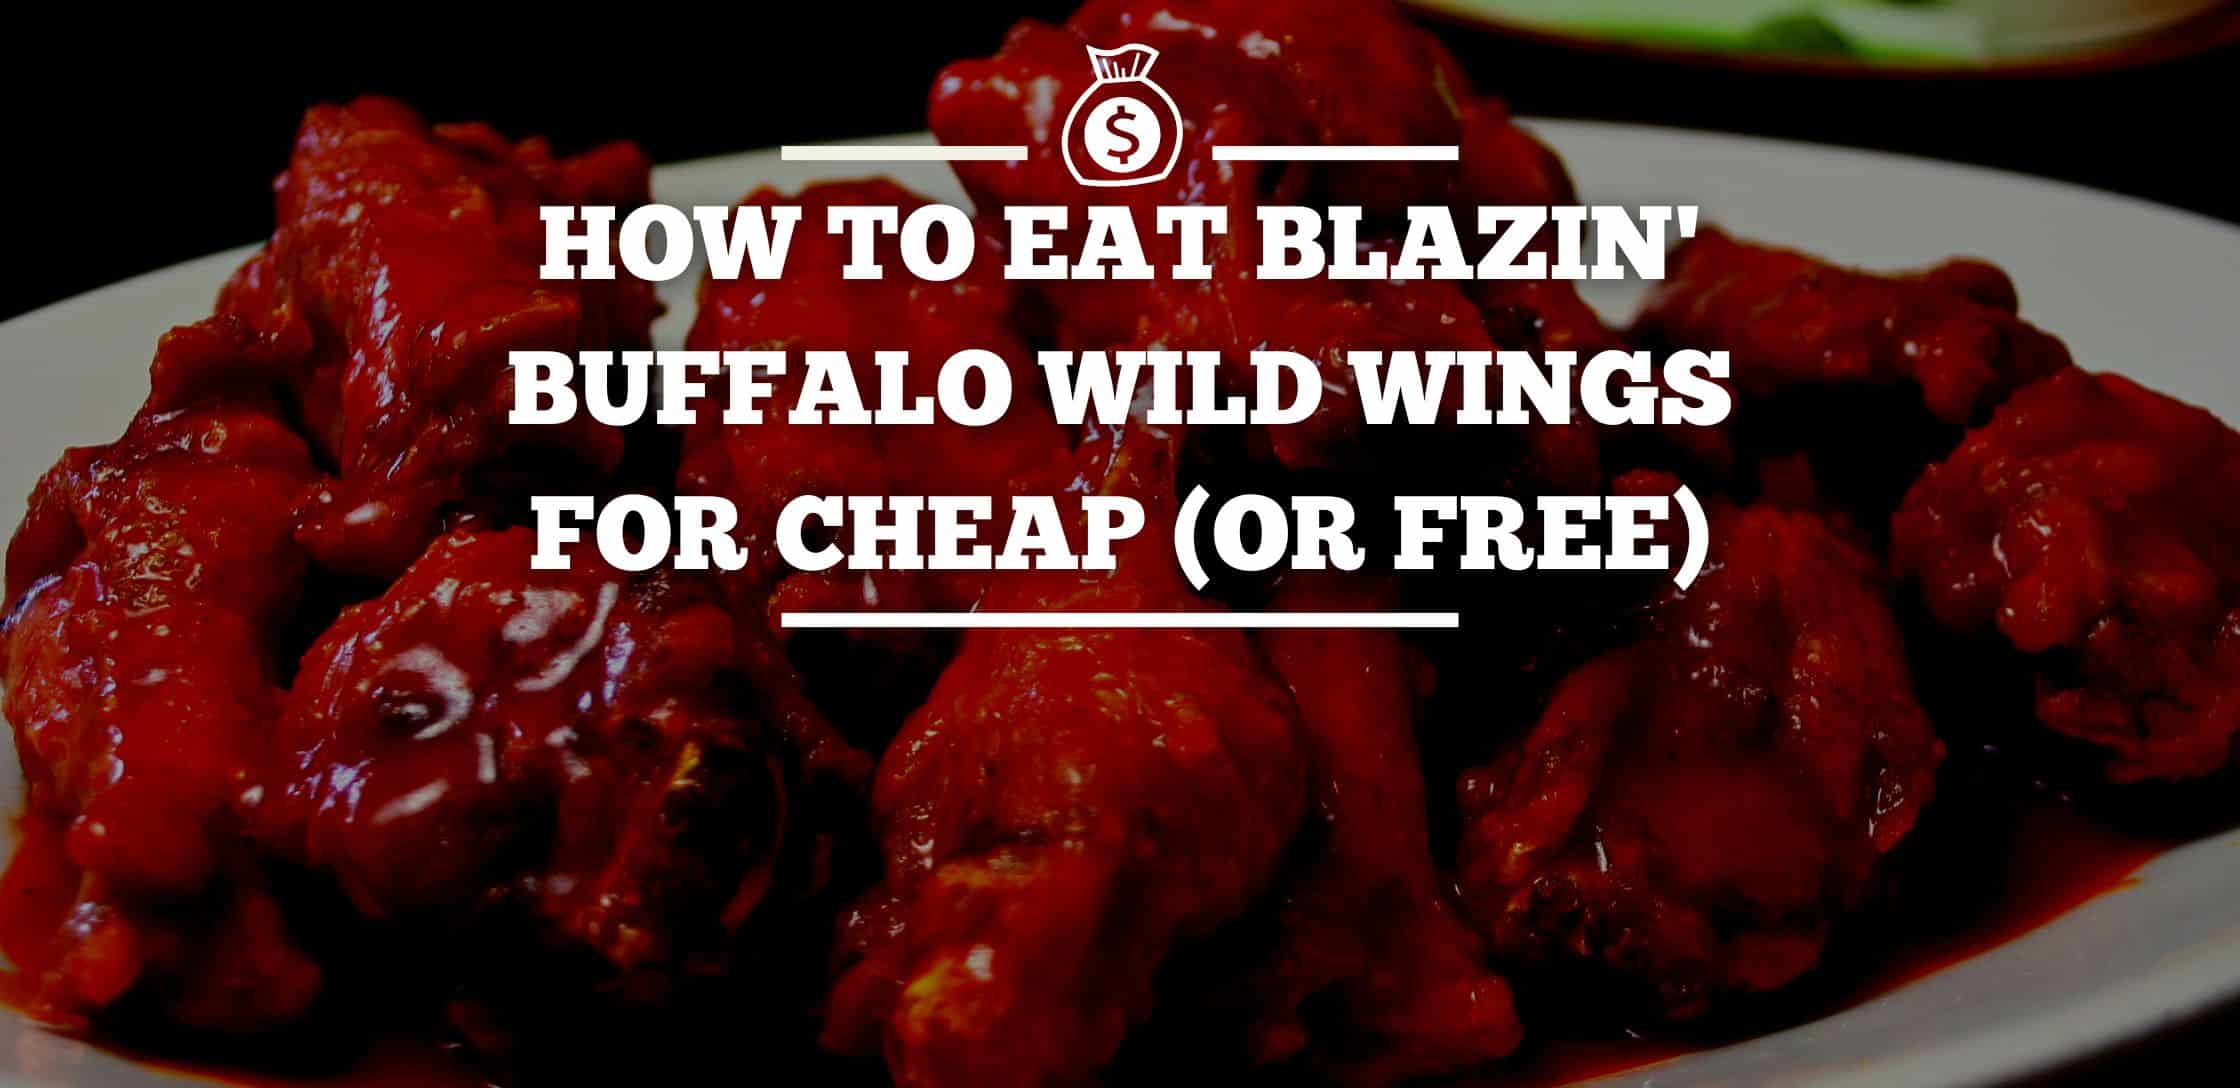 How To Eat Blazin' Buffalo Wild Wings For Cheap (Or Free)